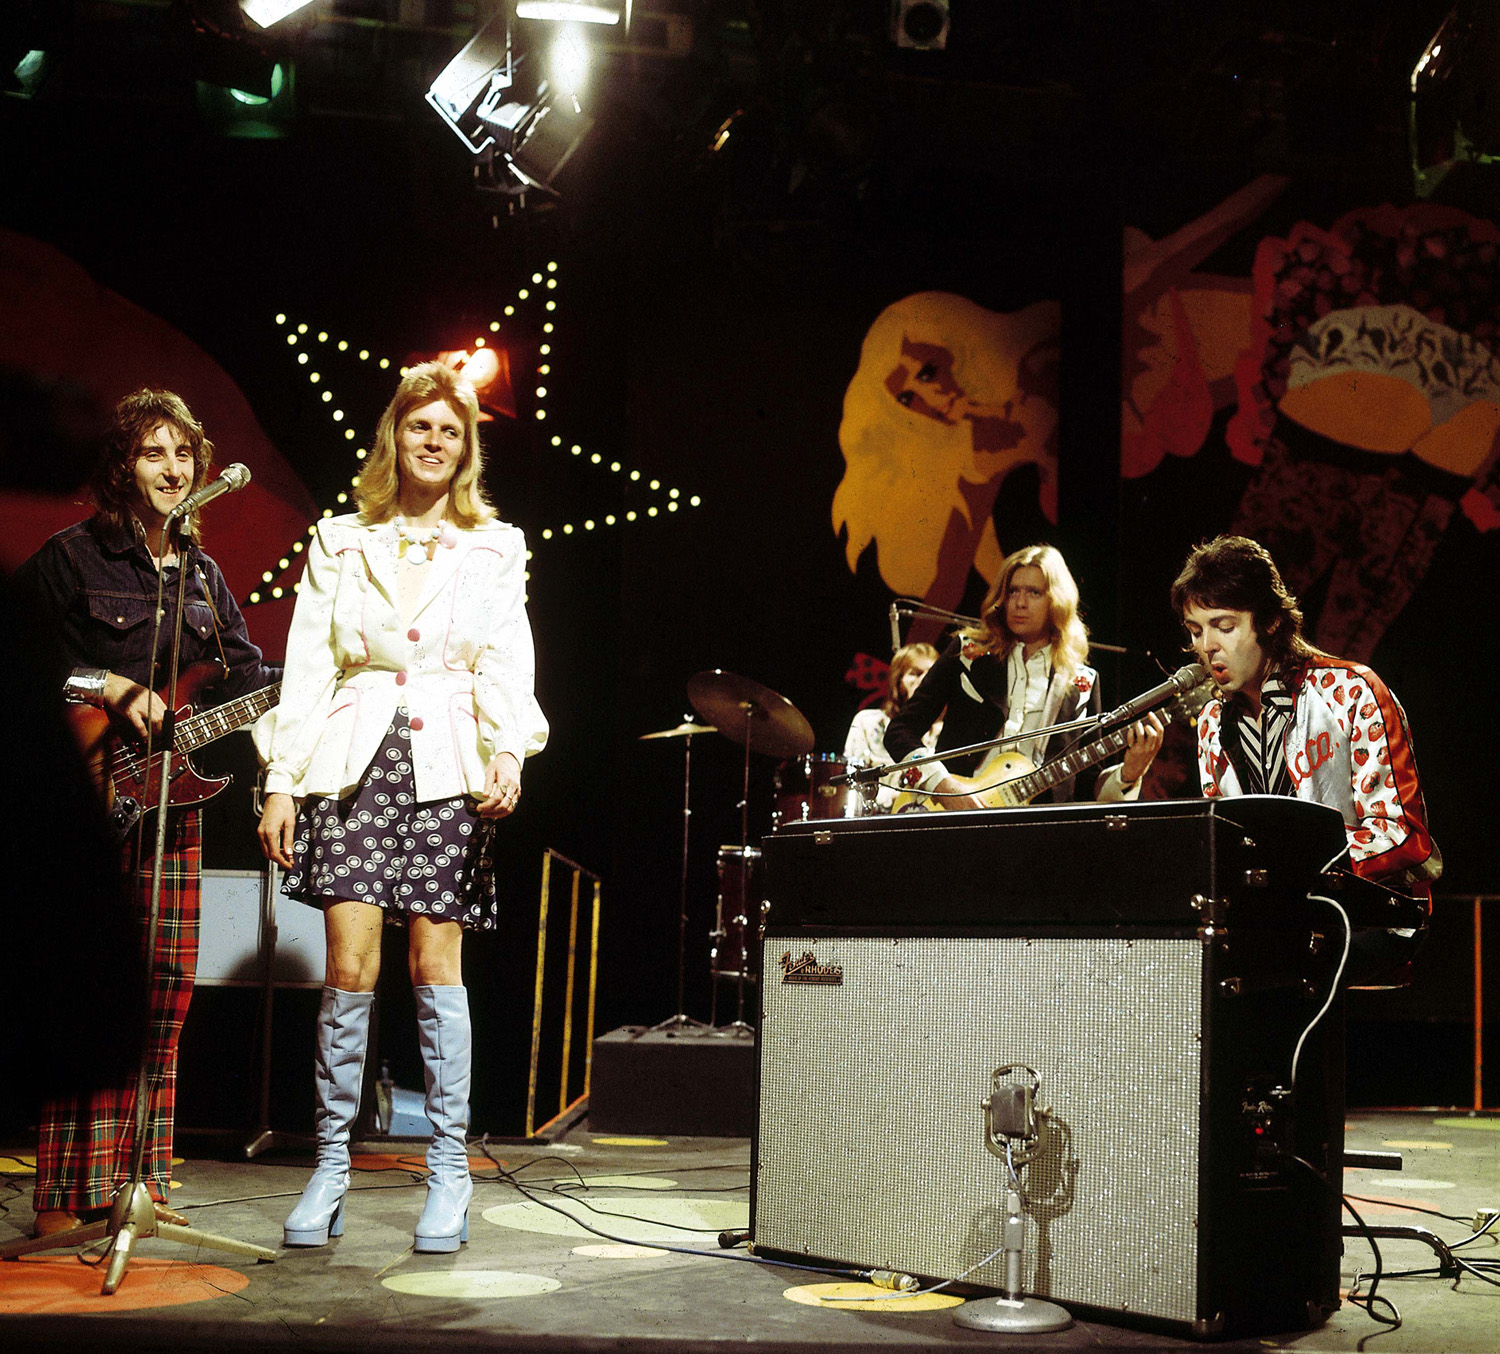 Wings; L-R: Denny Laine, Linda McCartney, Henry McCullogh, Paul McCartney (playing Fender Rhodes electric piano keyboard) - performing. United Kingdom, April 4, 1973.